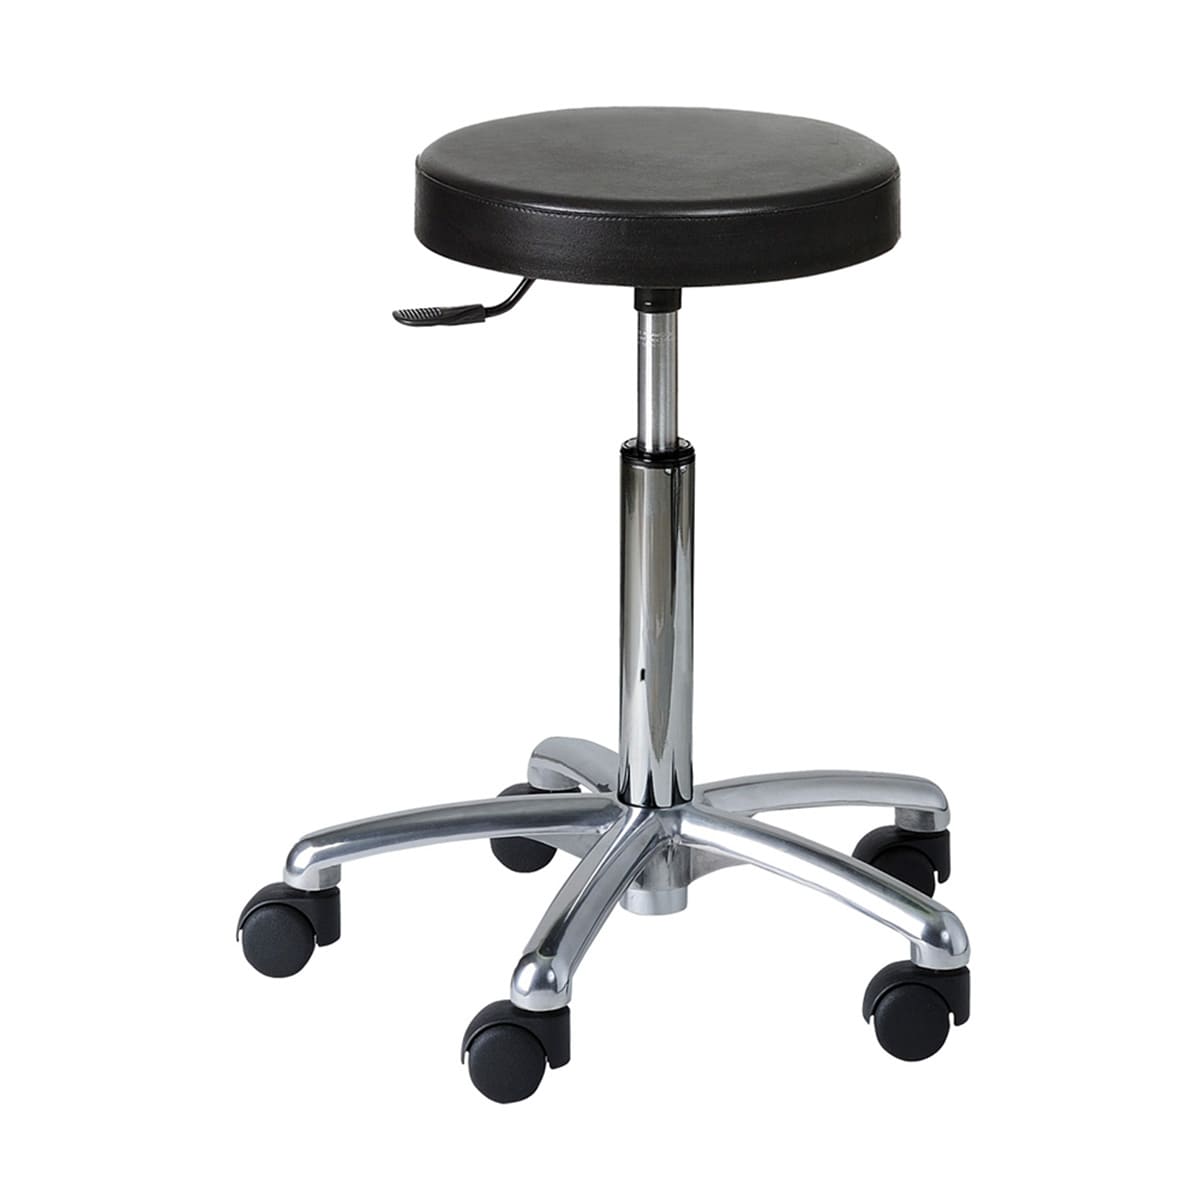 Stool with polyurethane round seat, stainless steel base